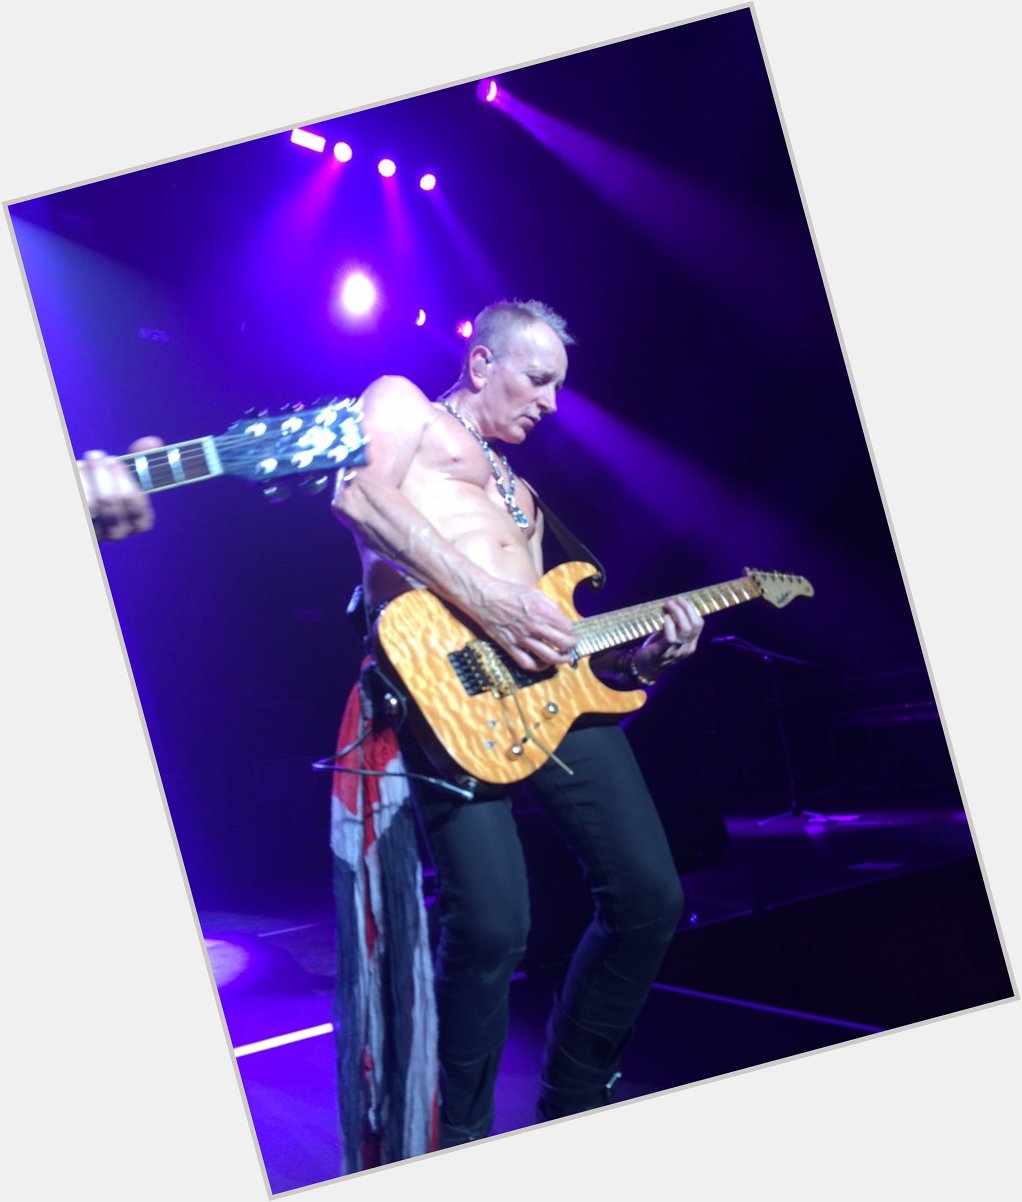 Happy Birthday Phil
Phil Collen (G Def Leppard)

Have a good day & Day off on this tour  